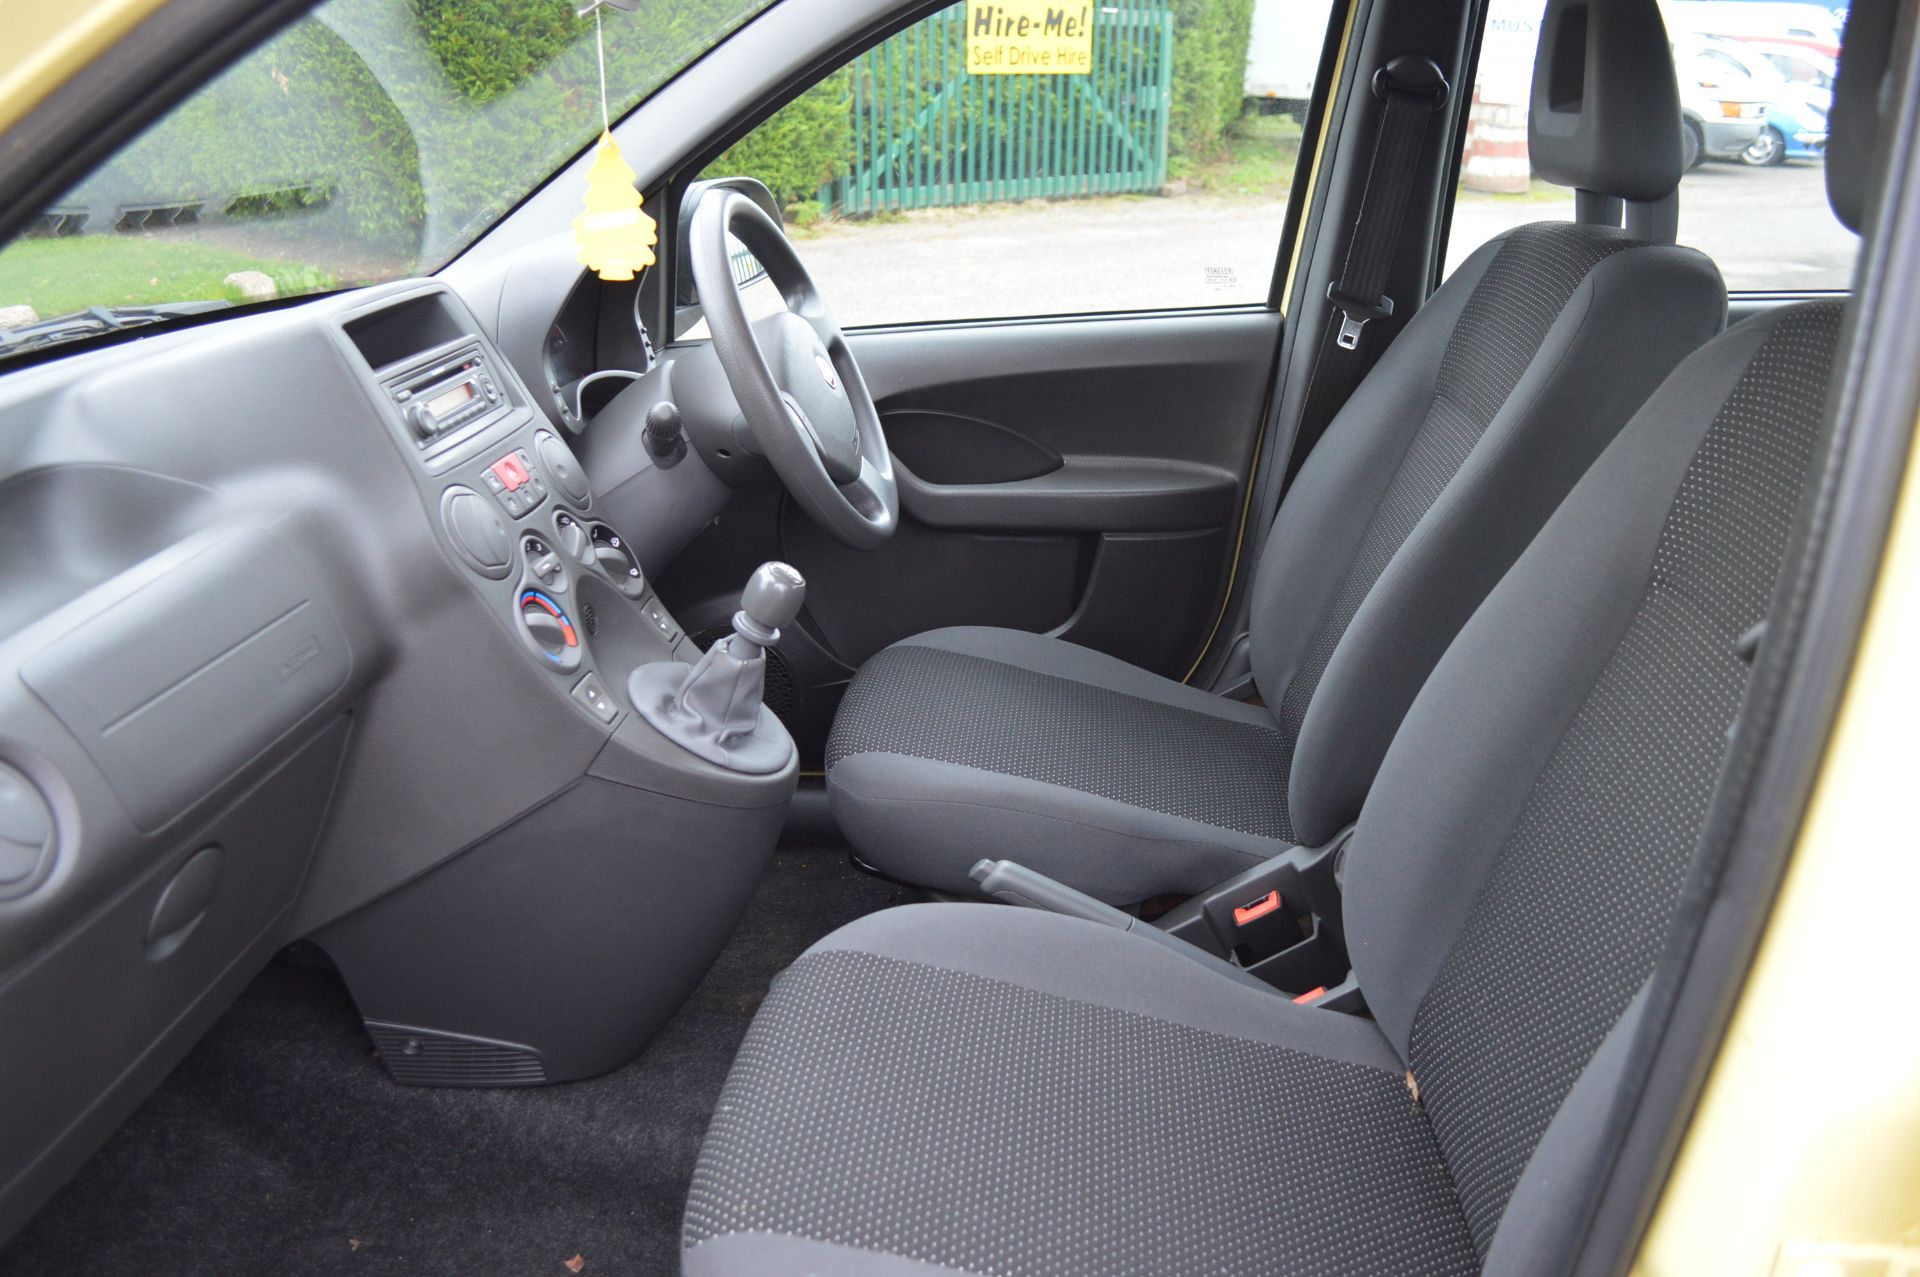 2010/59 REG FIAT PANDA ACTIVE ECO, SHOWING 1 OWNER FROM NEW - DRIVES GREAT - Image 9 of 25